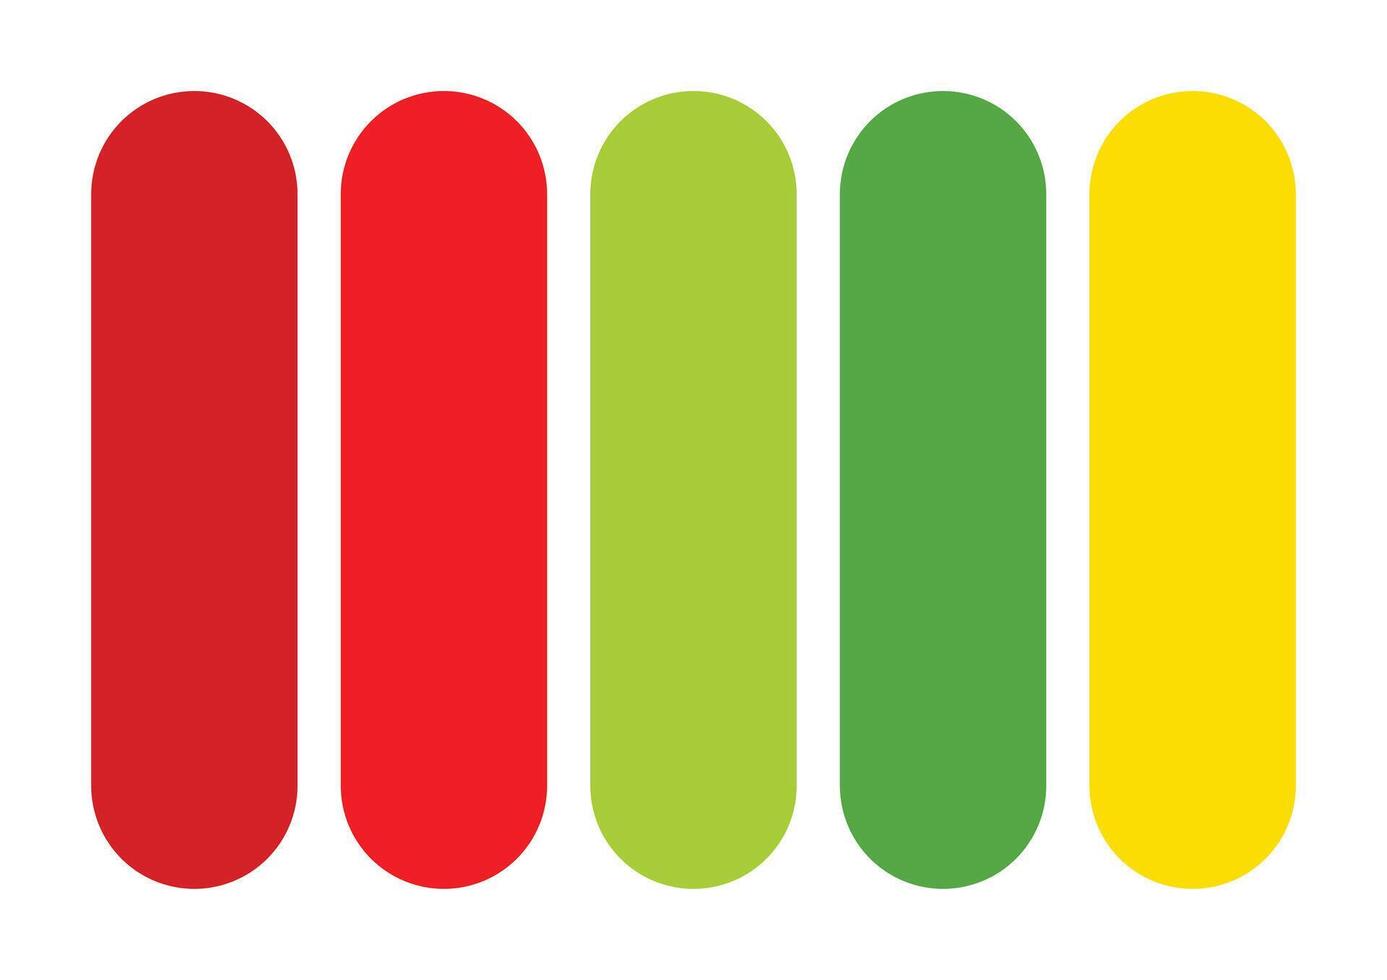 Vibrant Trio Red, Green, and Yellow Color Palette vector